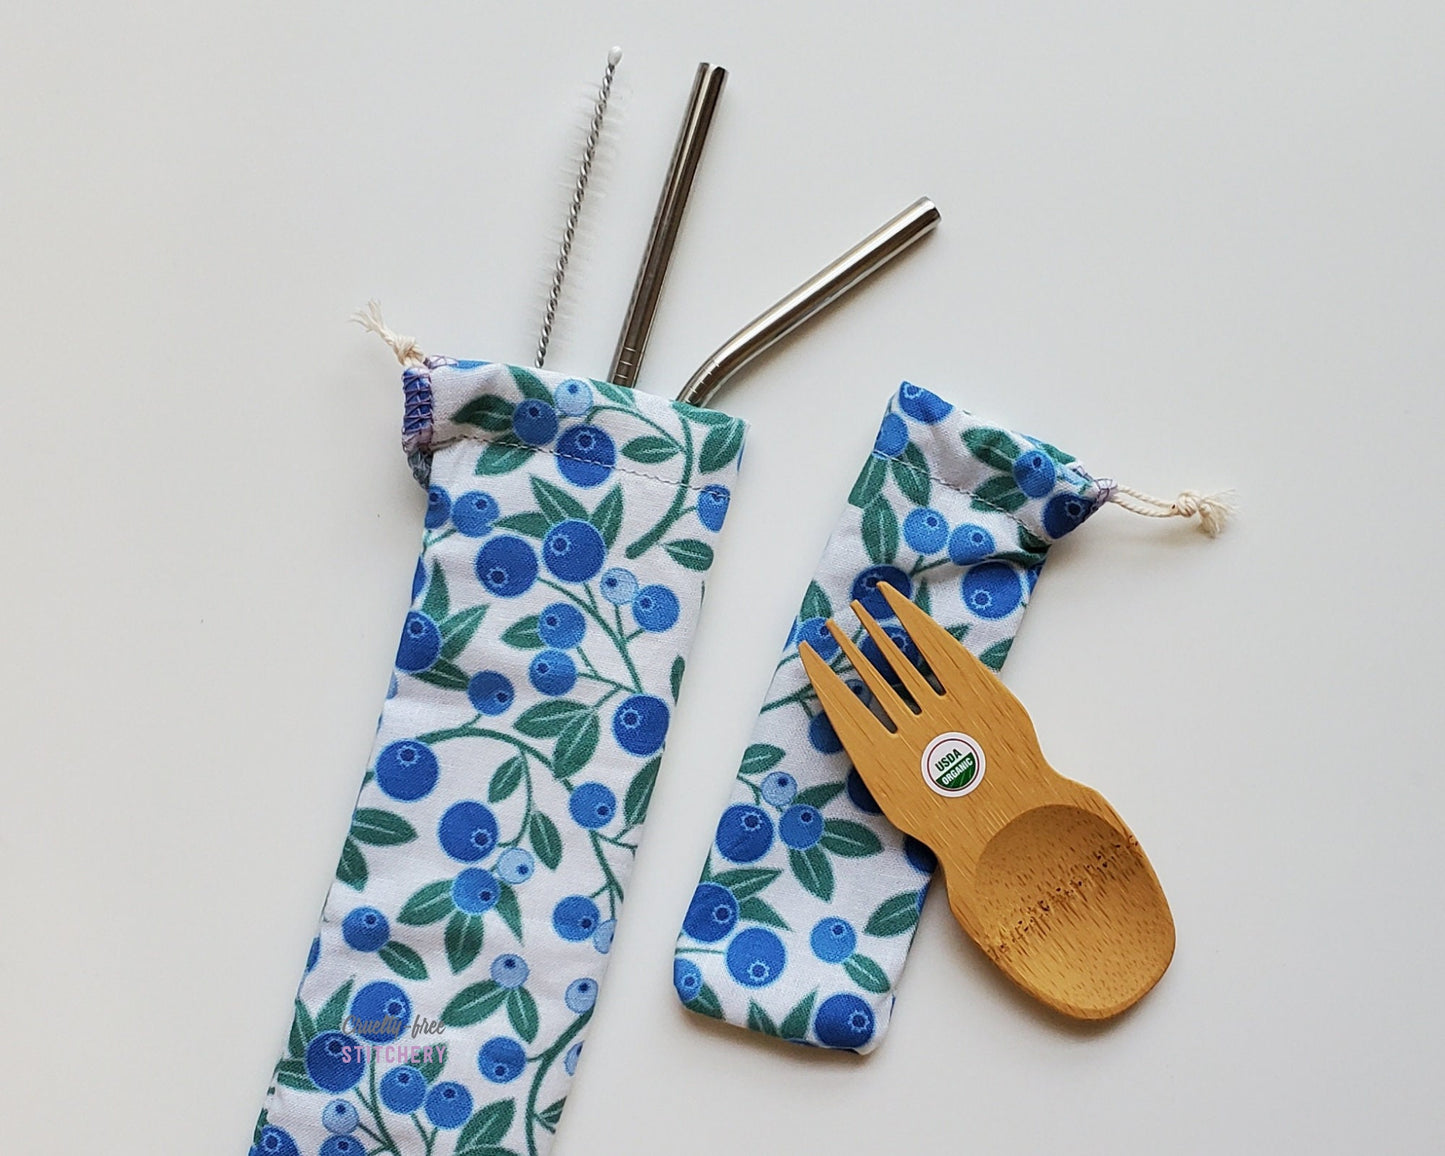 Reusable bamboo spork and straw pouch set. The pouches are a white fabric with printed blueberries and green vines and leaves.